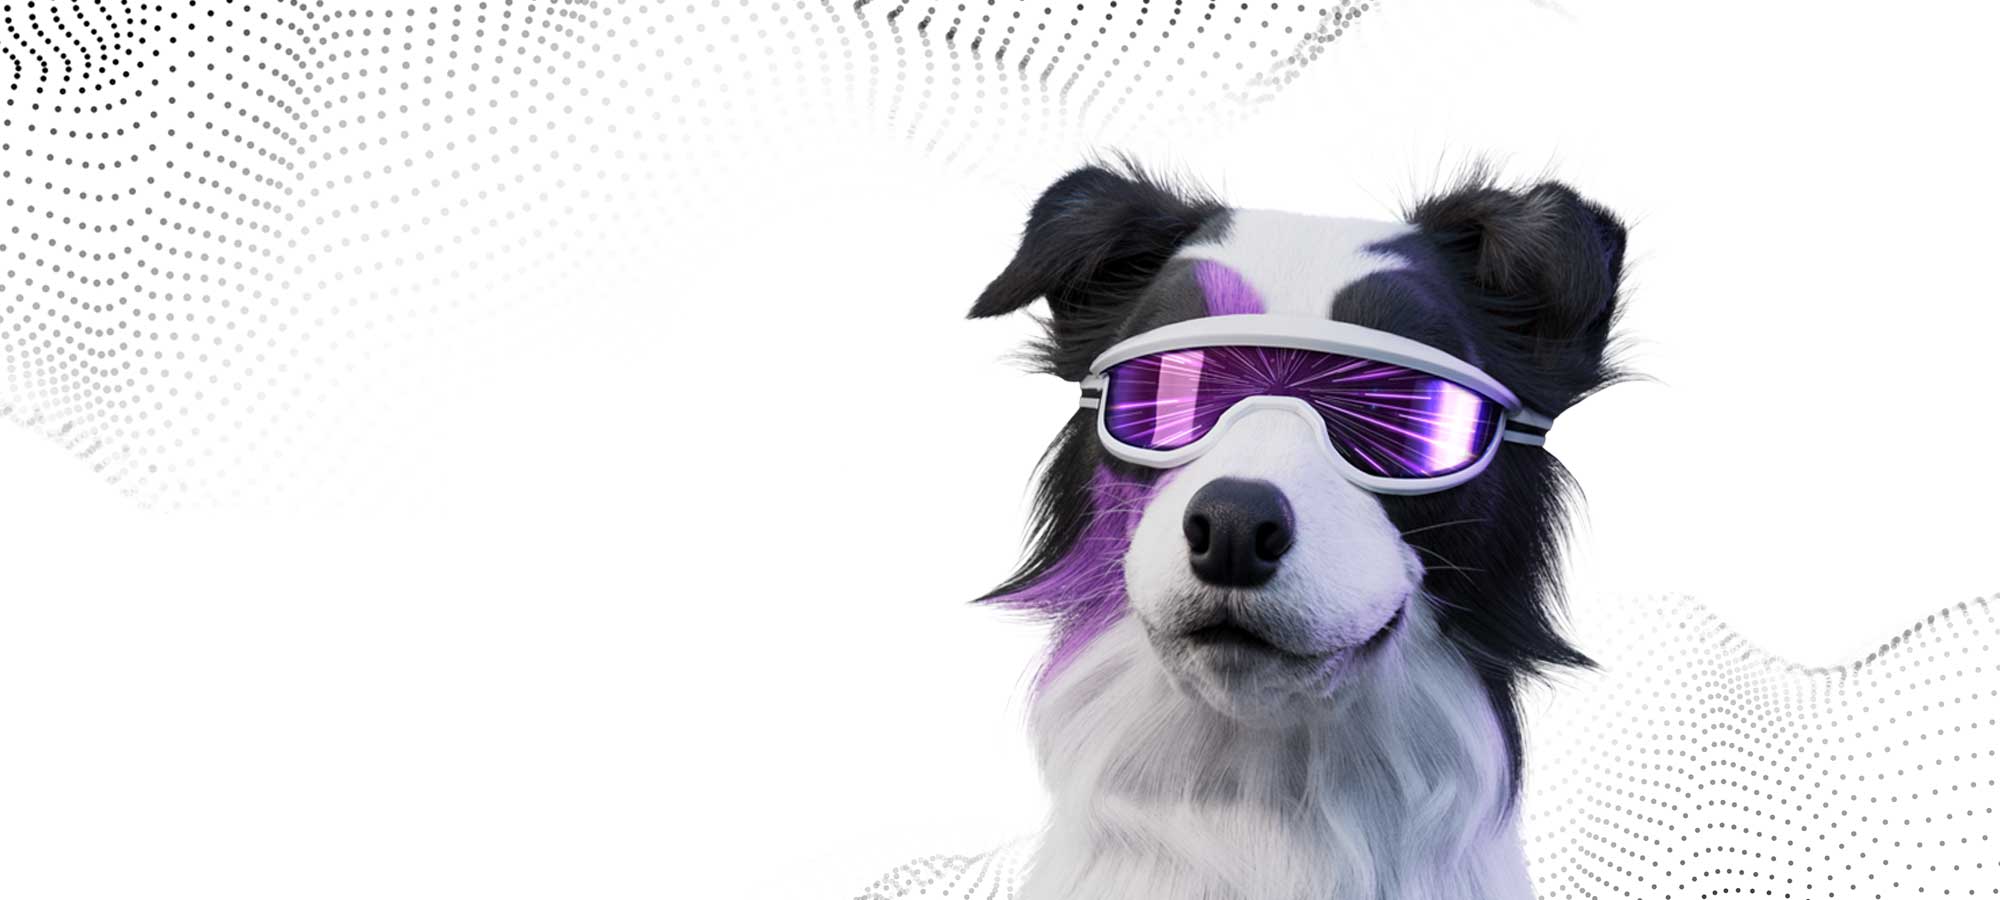 Dog with goggles